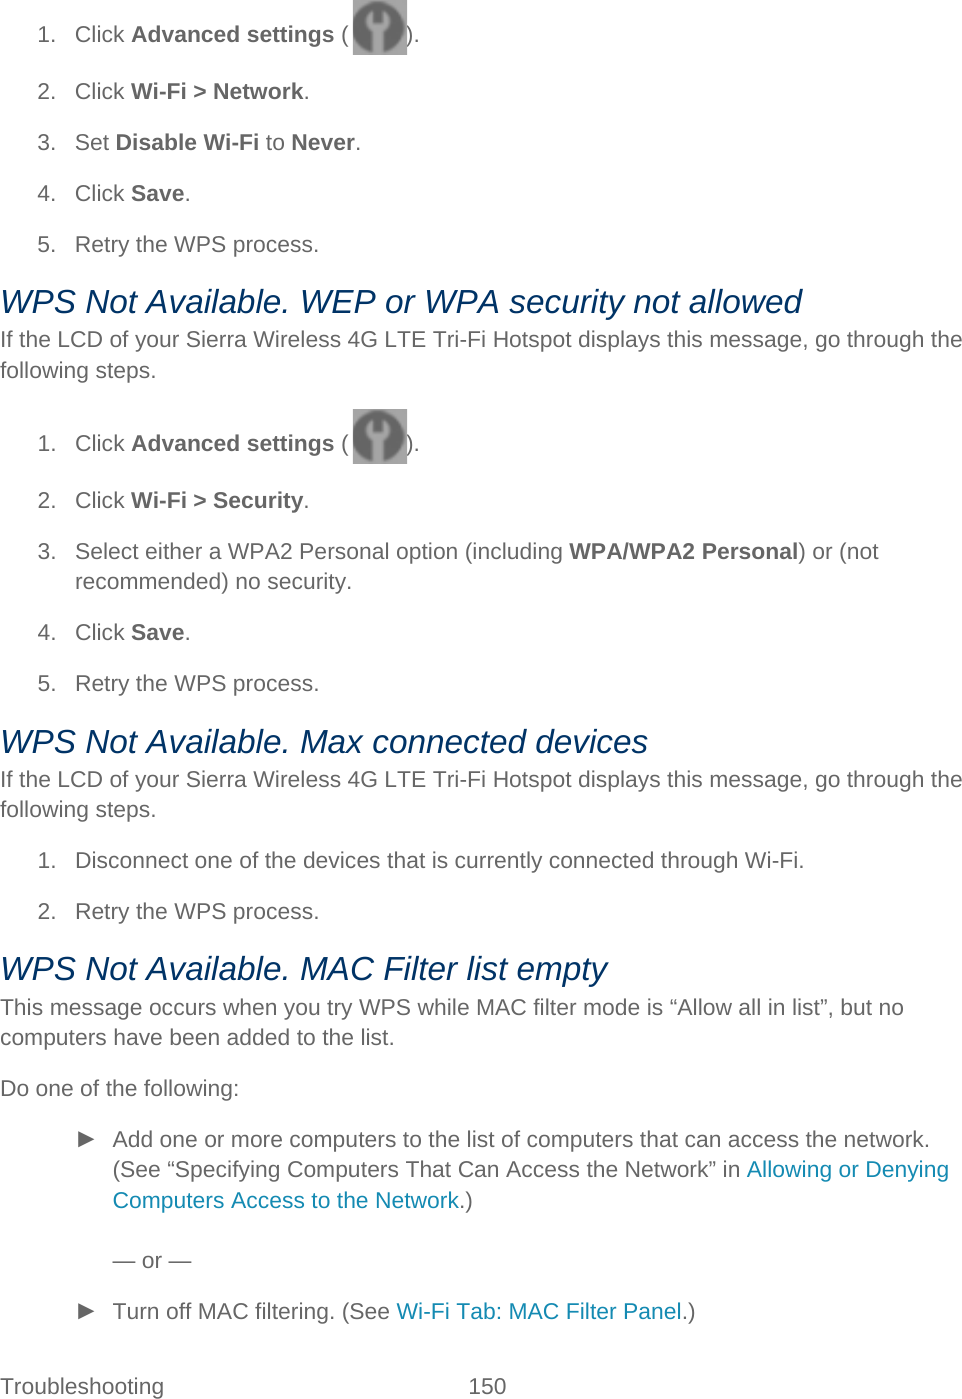 Troubleshooting 150   1. Click Advanced settings ( ). 2. Click Wi-Fi &gt; Network. 3. Set Disable Wi-Fi to Never. 4. Click Save. 5. Retry the WPS process. WPS Not Available. WEP or WPA security not allowed If the LCD of your Sierra Wireless 4G LTE Tri-Fi Hotspot displays this message, go through the following steps. 1. Click Advanced settings ( ). 2. Click Wi-Fi &gt; Security. 3. Select either a WPA2 Personal option (including WPA/WPA2 Personal) or (not recommended) no security. 4. Click Save. 5. Retry the WPS process. WPS Not Available. Max connected devices If the LCD of your Sierra Wireless 4G LTE Tri-Fi Hotspot displays this message, go through the following steps. 1. Disconnect one of the devices that is currently connected through Wi-Fi. 2. Retry the WPS process. WPS Not Available. MAC Filter list empty This message occurs when you try WPS while MAC filter mode is “Allow all in list”, but no computers have been added to the list. Do one of the following: ► Add one or more computers to the list of computers that can access the network. (See “Specifying Computers That Can Access the Network” in Allowing or Denying Computers Access to the Network.)  — or — ► Turn off MAC filtering. (See Wi-Fi Tab: MAC Filter Panel.) 